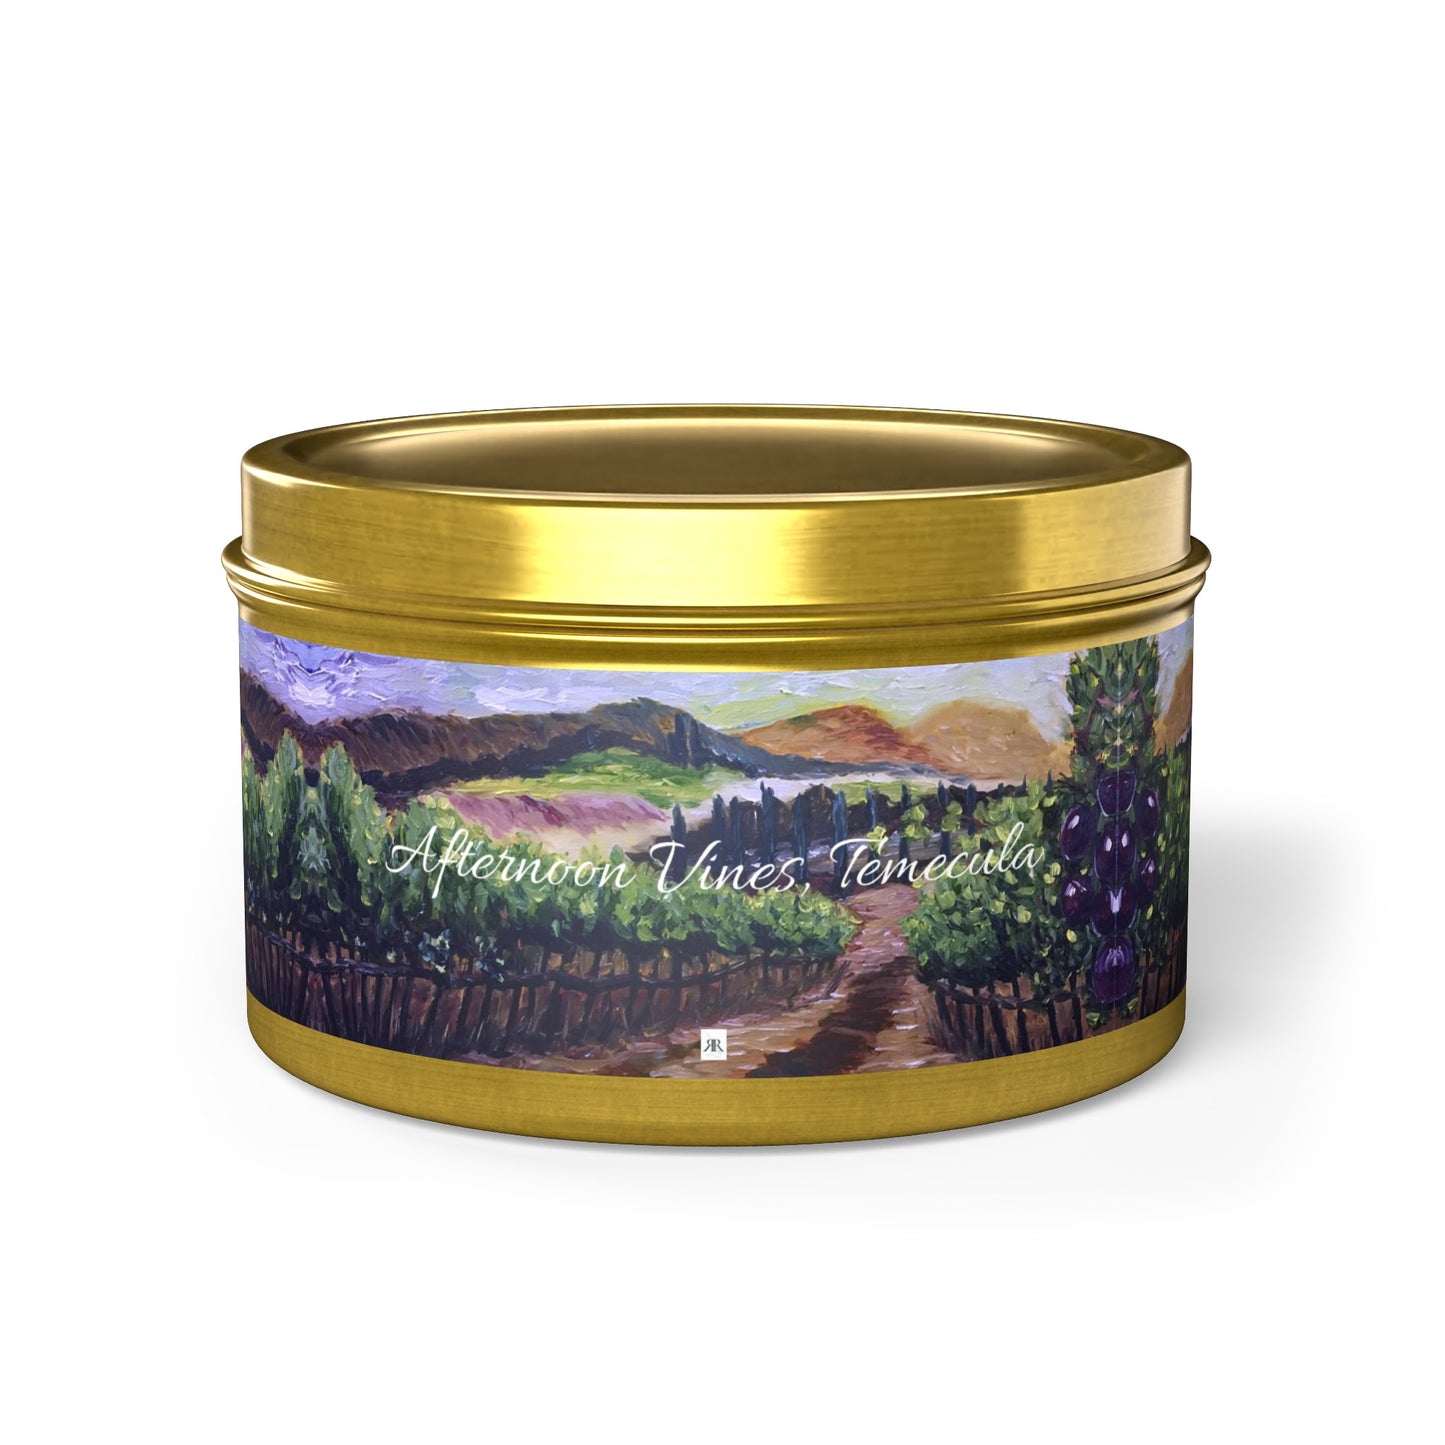 Afternoon Vines, Temecula Tin Candle